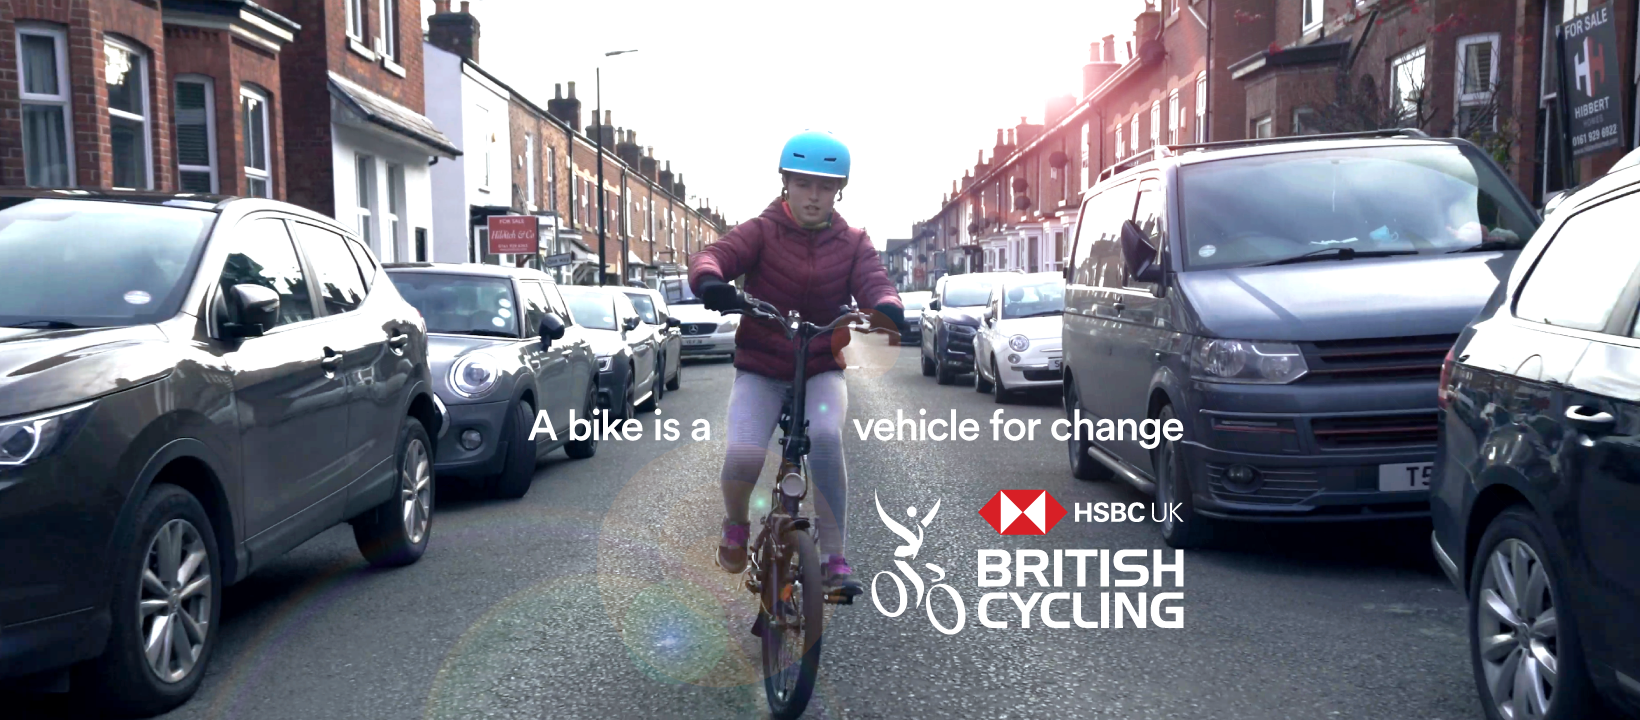 Celebrating 'The Year of the Bike' in our Christmas film